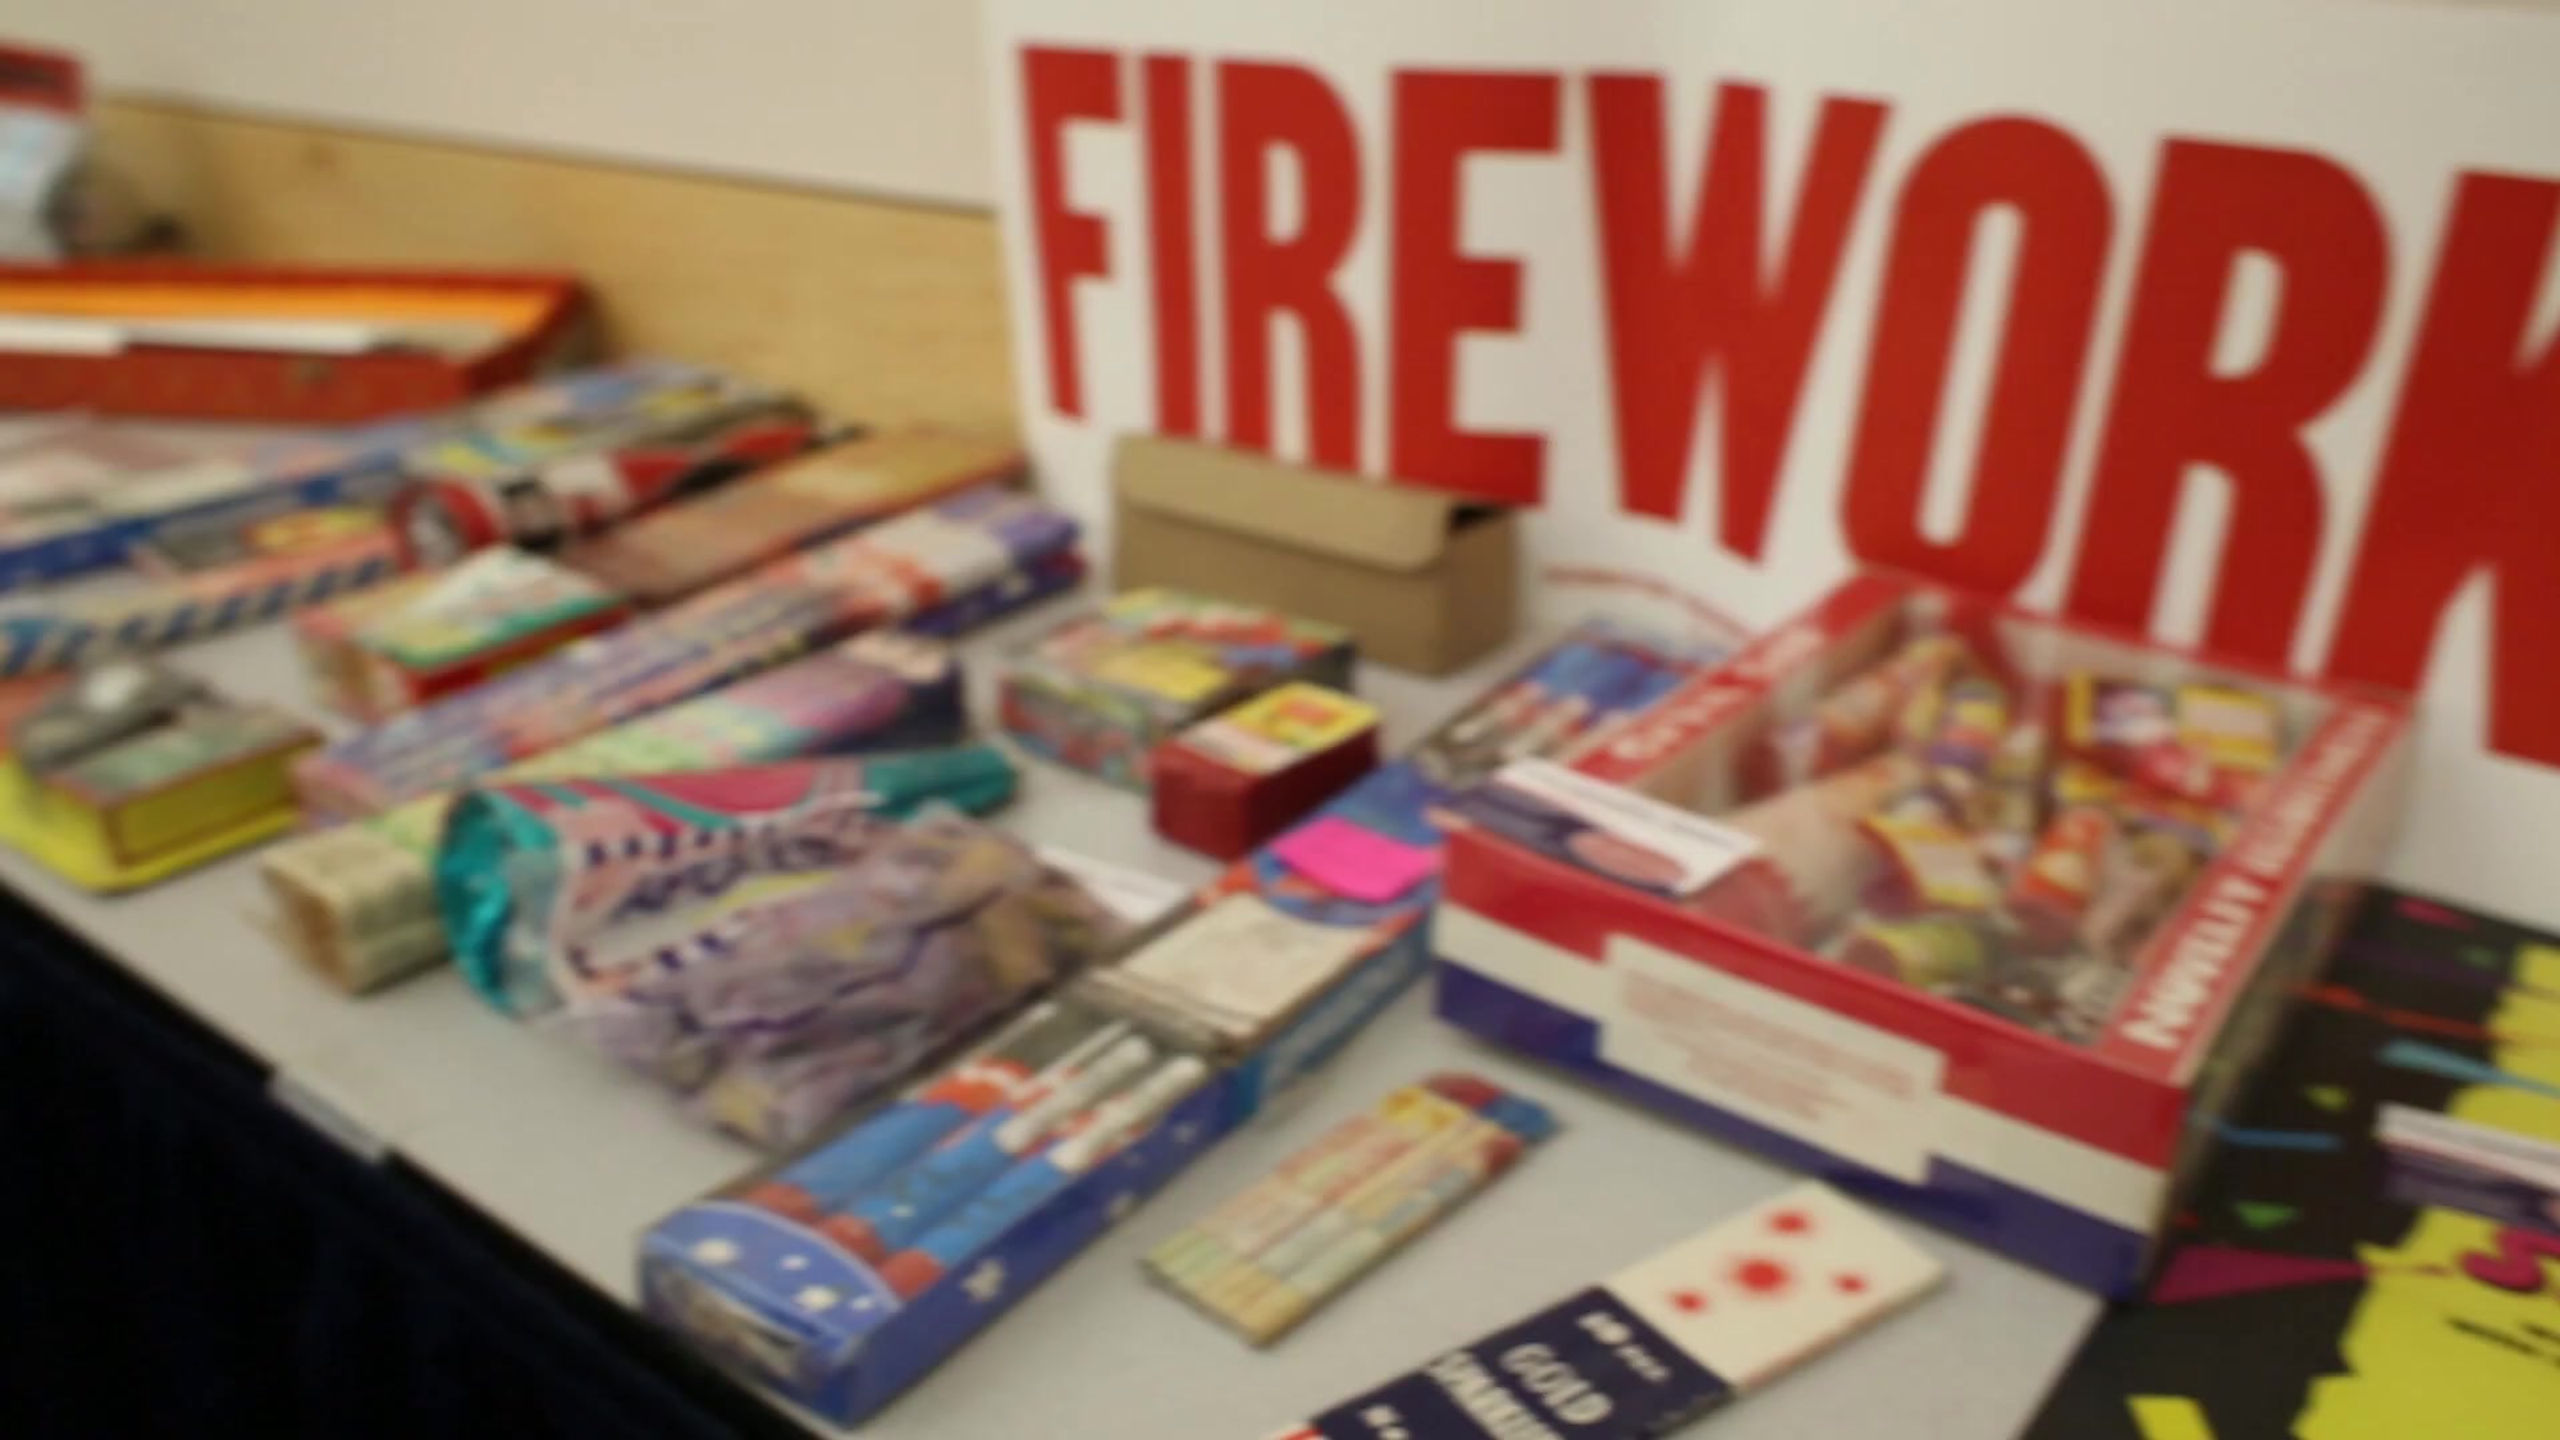 What is the National Fireworks Association (NFA)